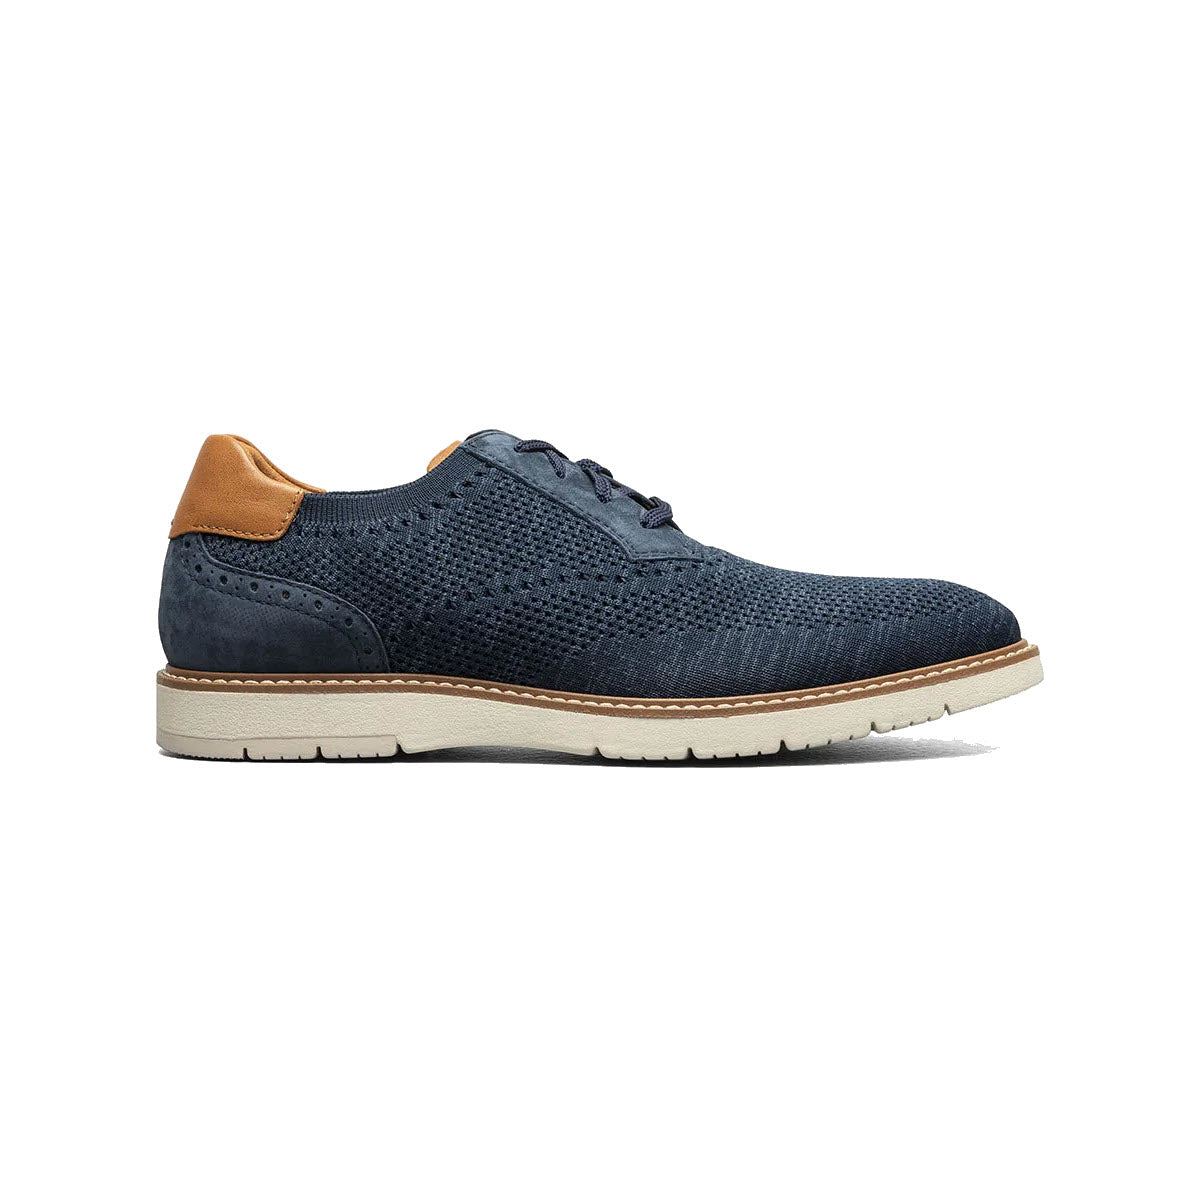 A single navy blue Florsheim Vibe Knit Plain Toe Oxford men&#39;s dress shoe with brogue detailing and a contrasting tan leather heel, set against a white background.